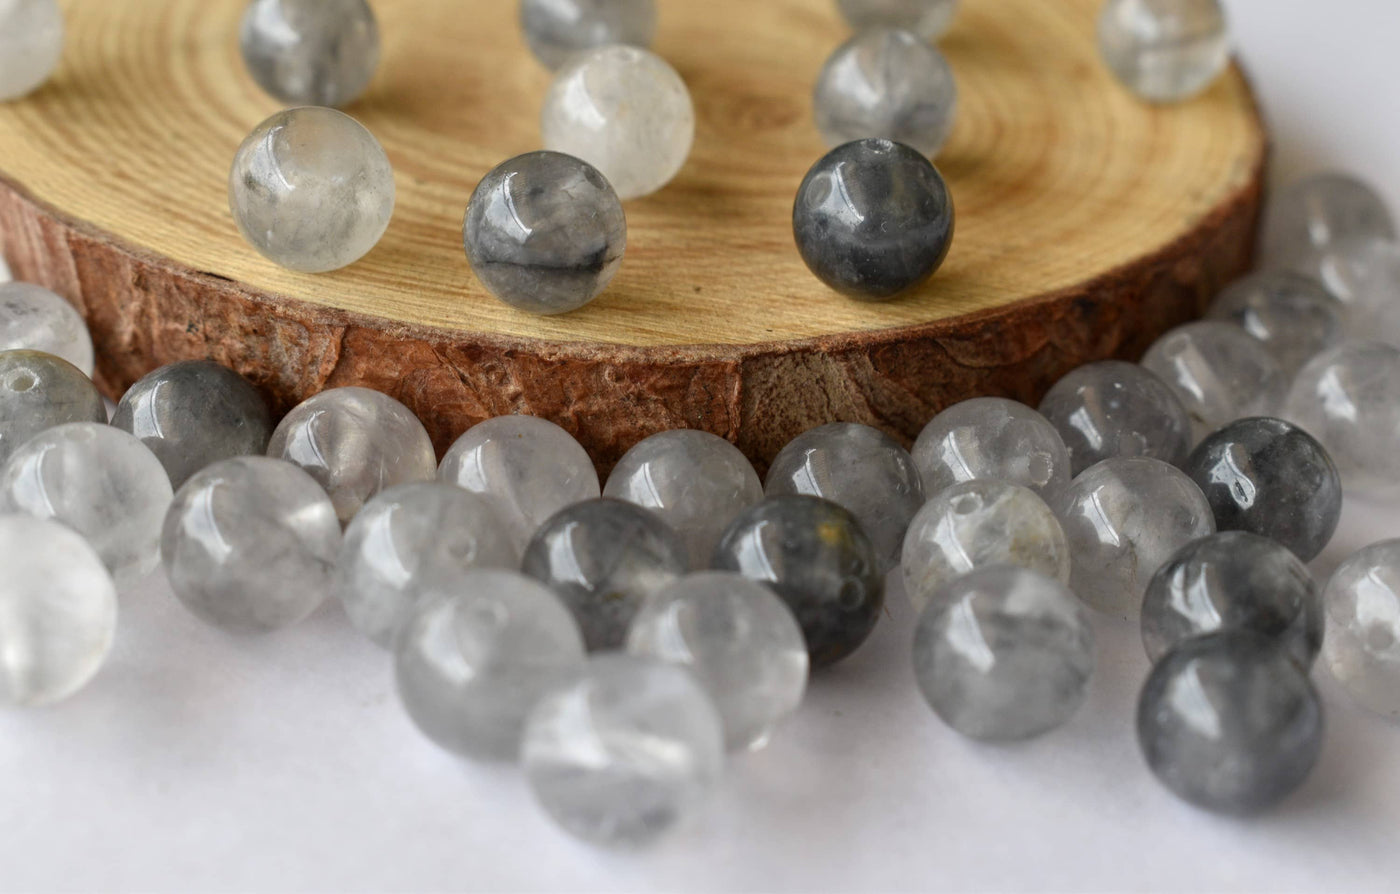 Cloudy Quartz Beads, Natural Round Crystal Beads 6mm to 10mm